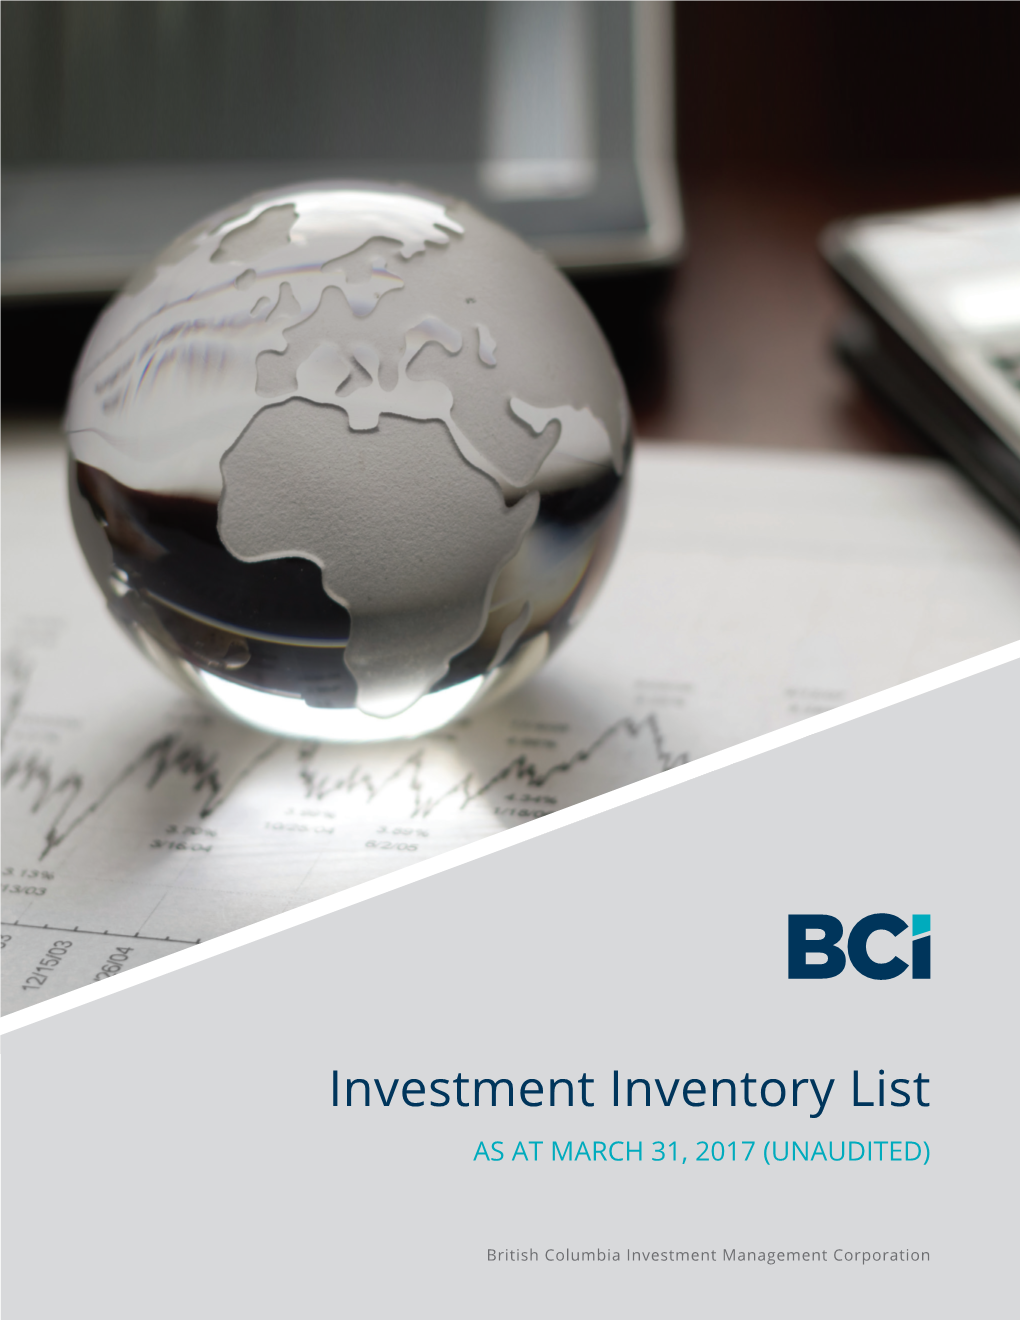 Investment Inventory List AS at MARCH 31, 2017 (UNAUDITED)